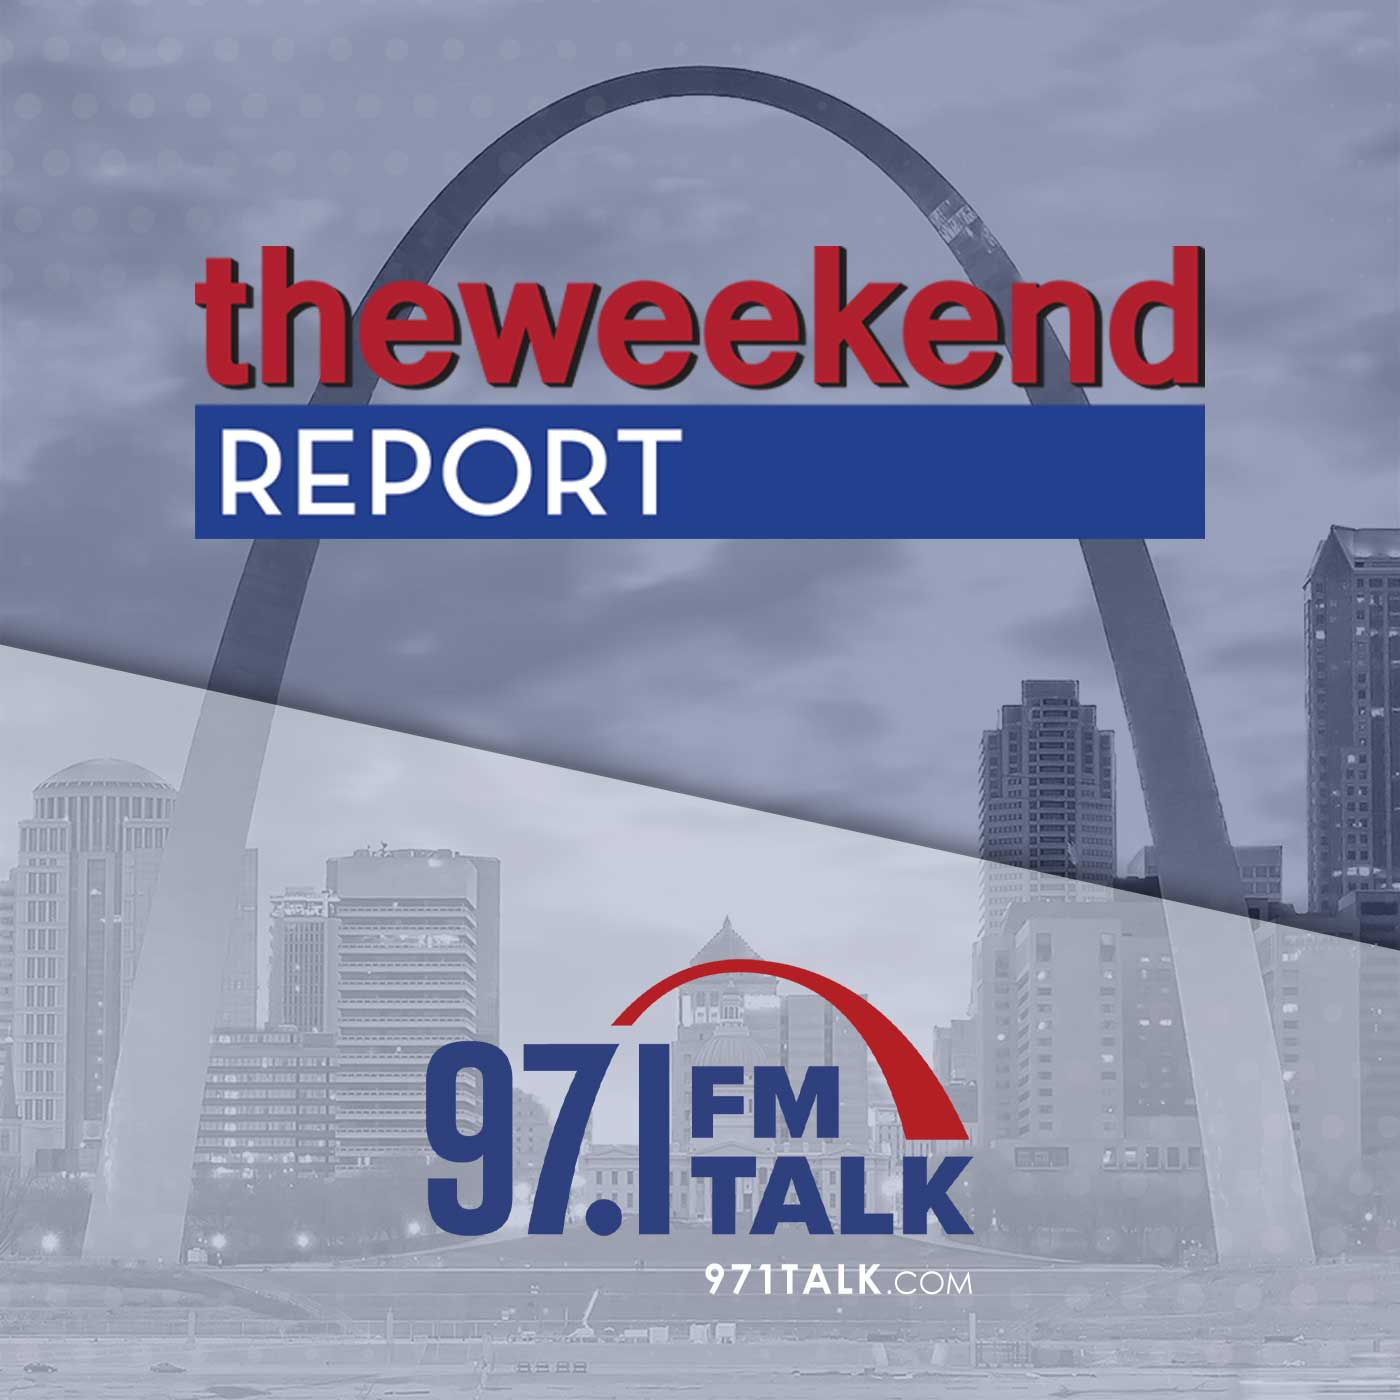 Weekend Report 1-11-20 - The whole gang is back in 2020.